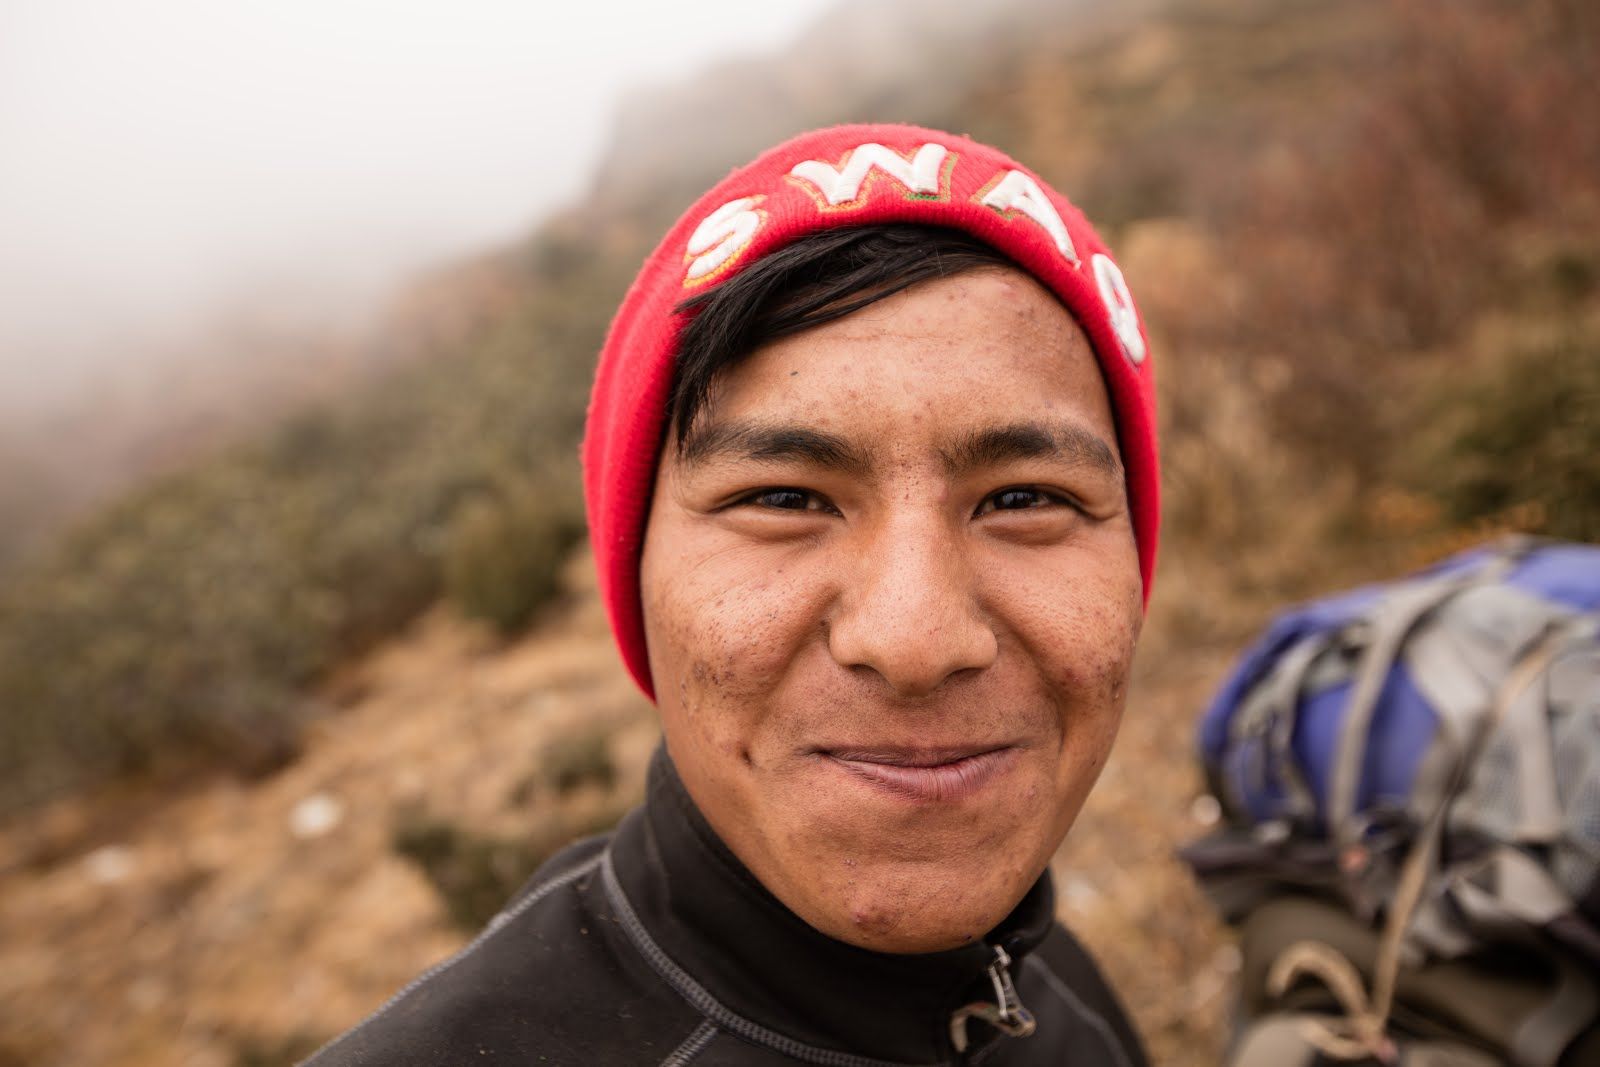 Chhiring Sherpa - Names get re-used a lot in Sherpa culture. This Chhiring was another porter on the trek.